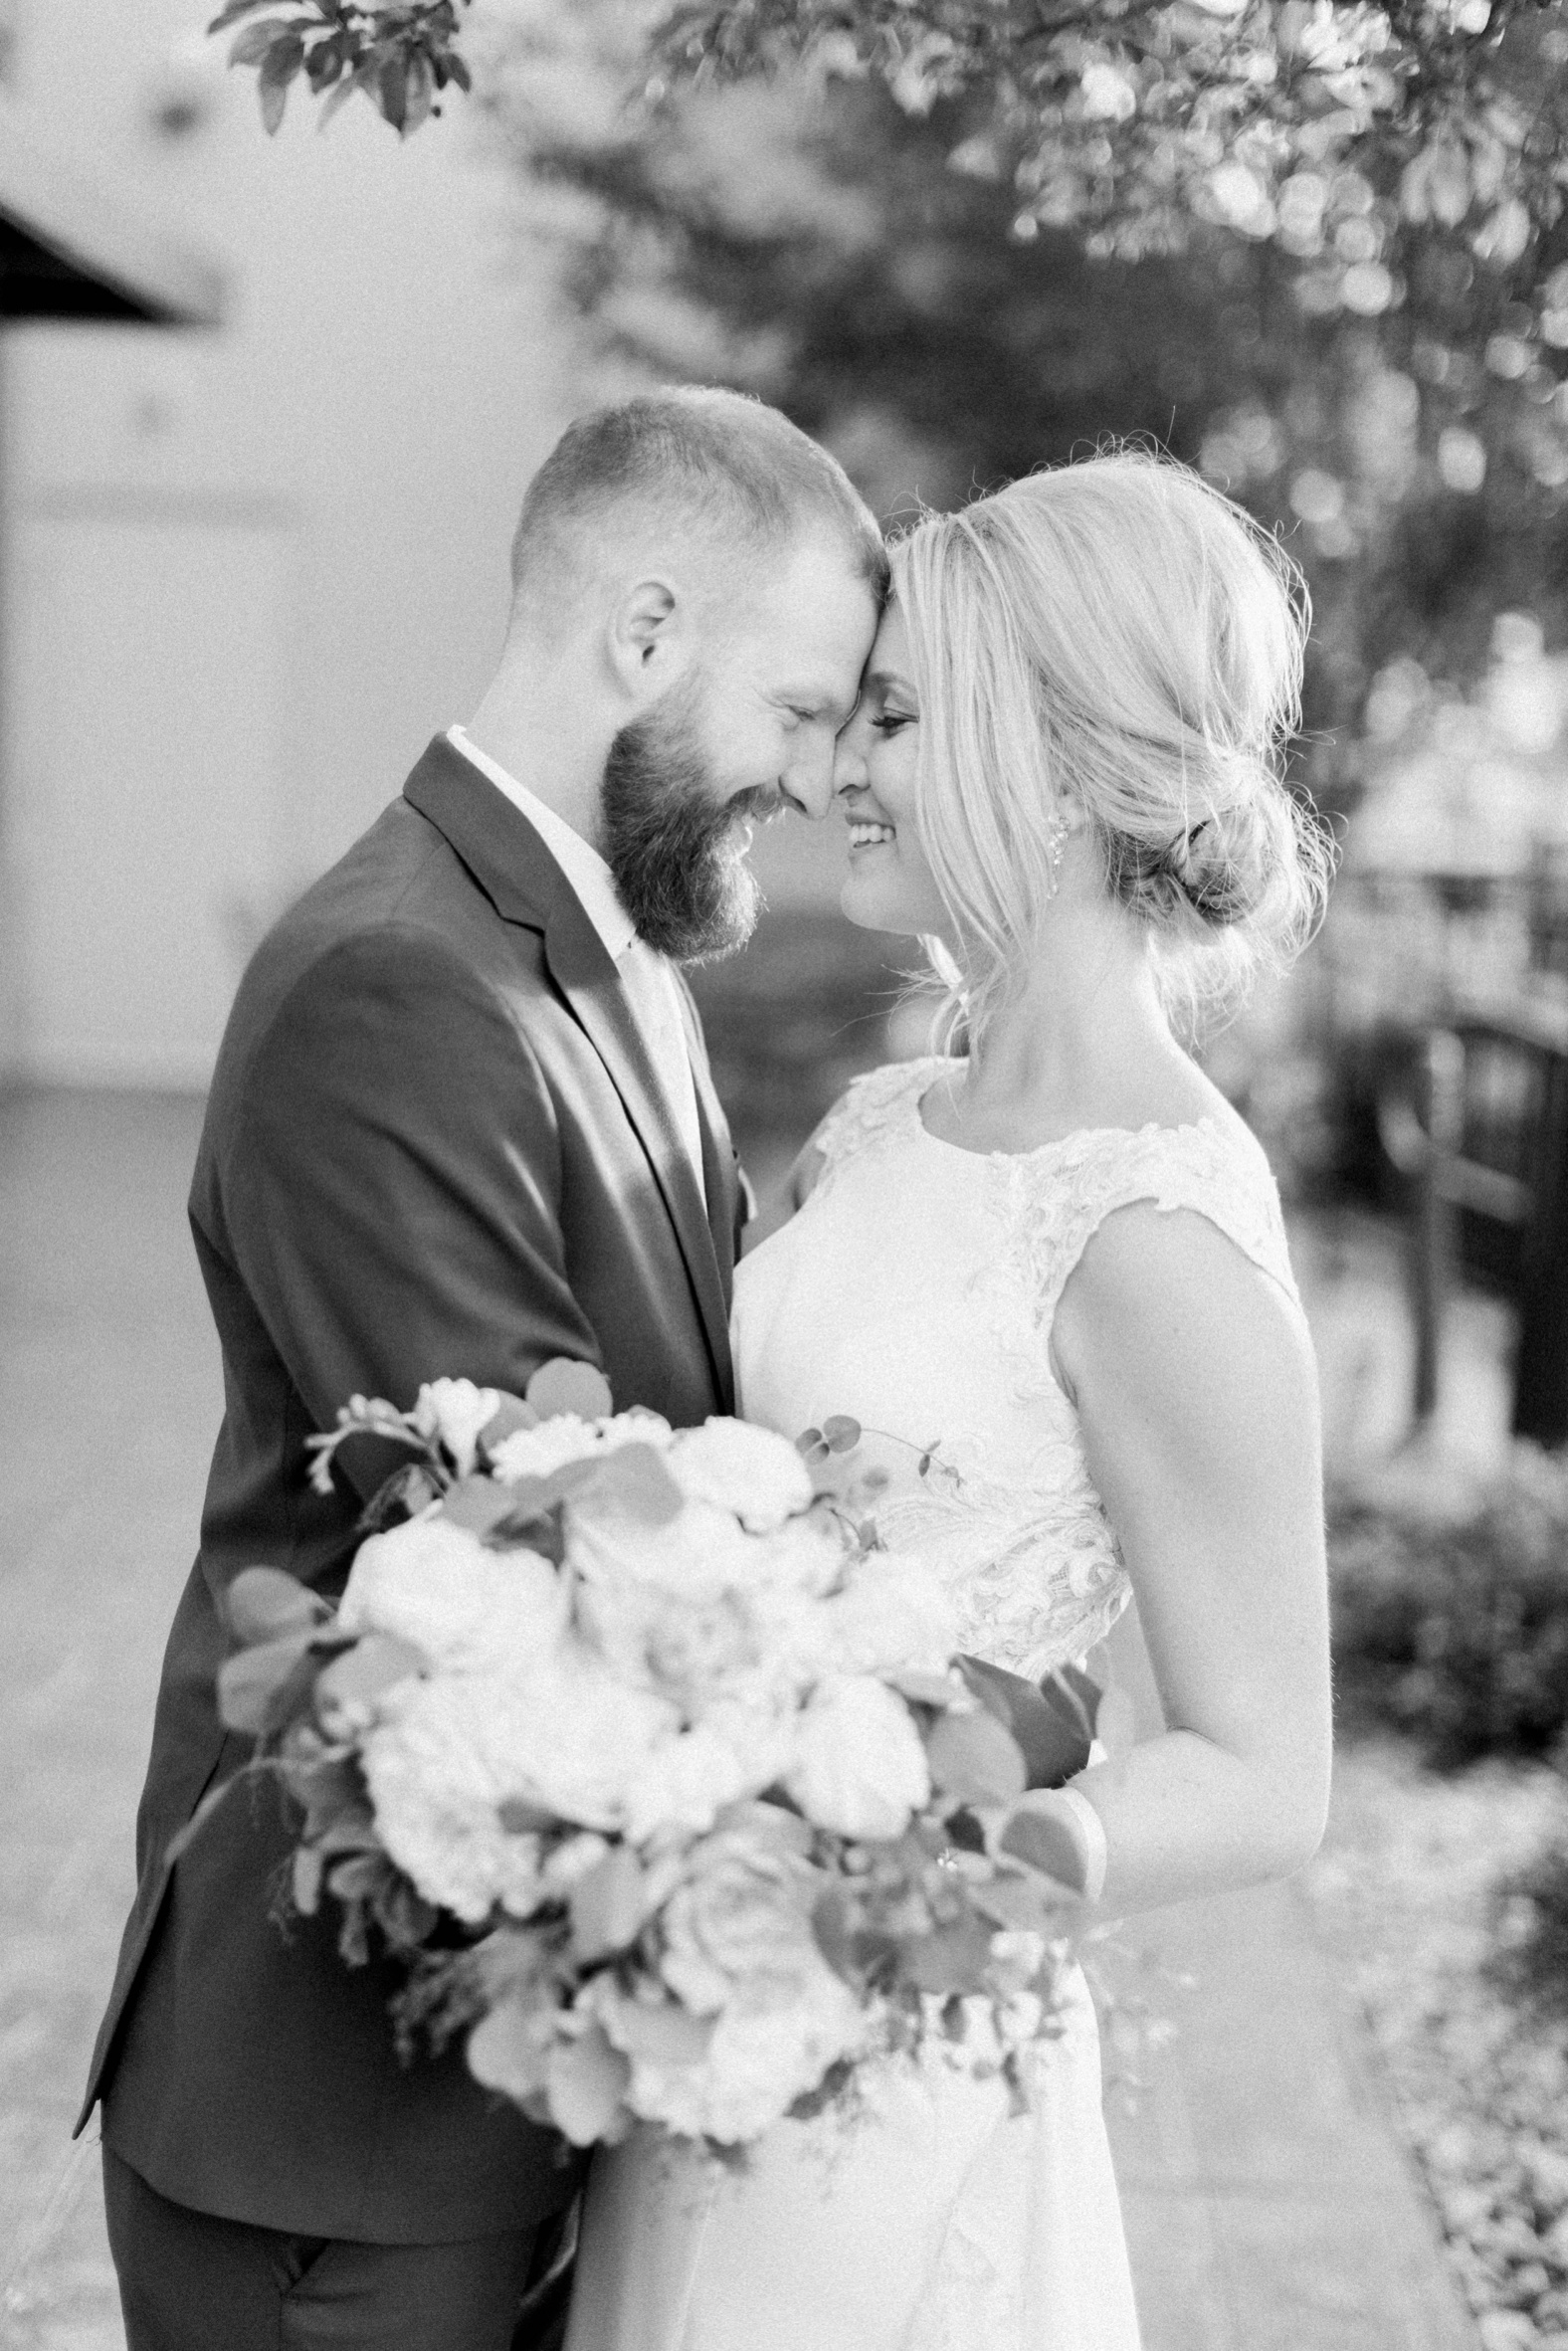 Jen + Connor | A Traditional Summer Wedding in Neenah, WI - Jessica ...